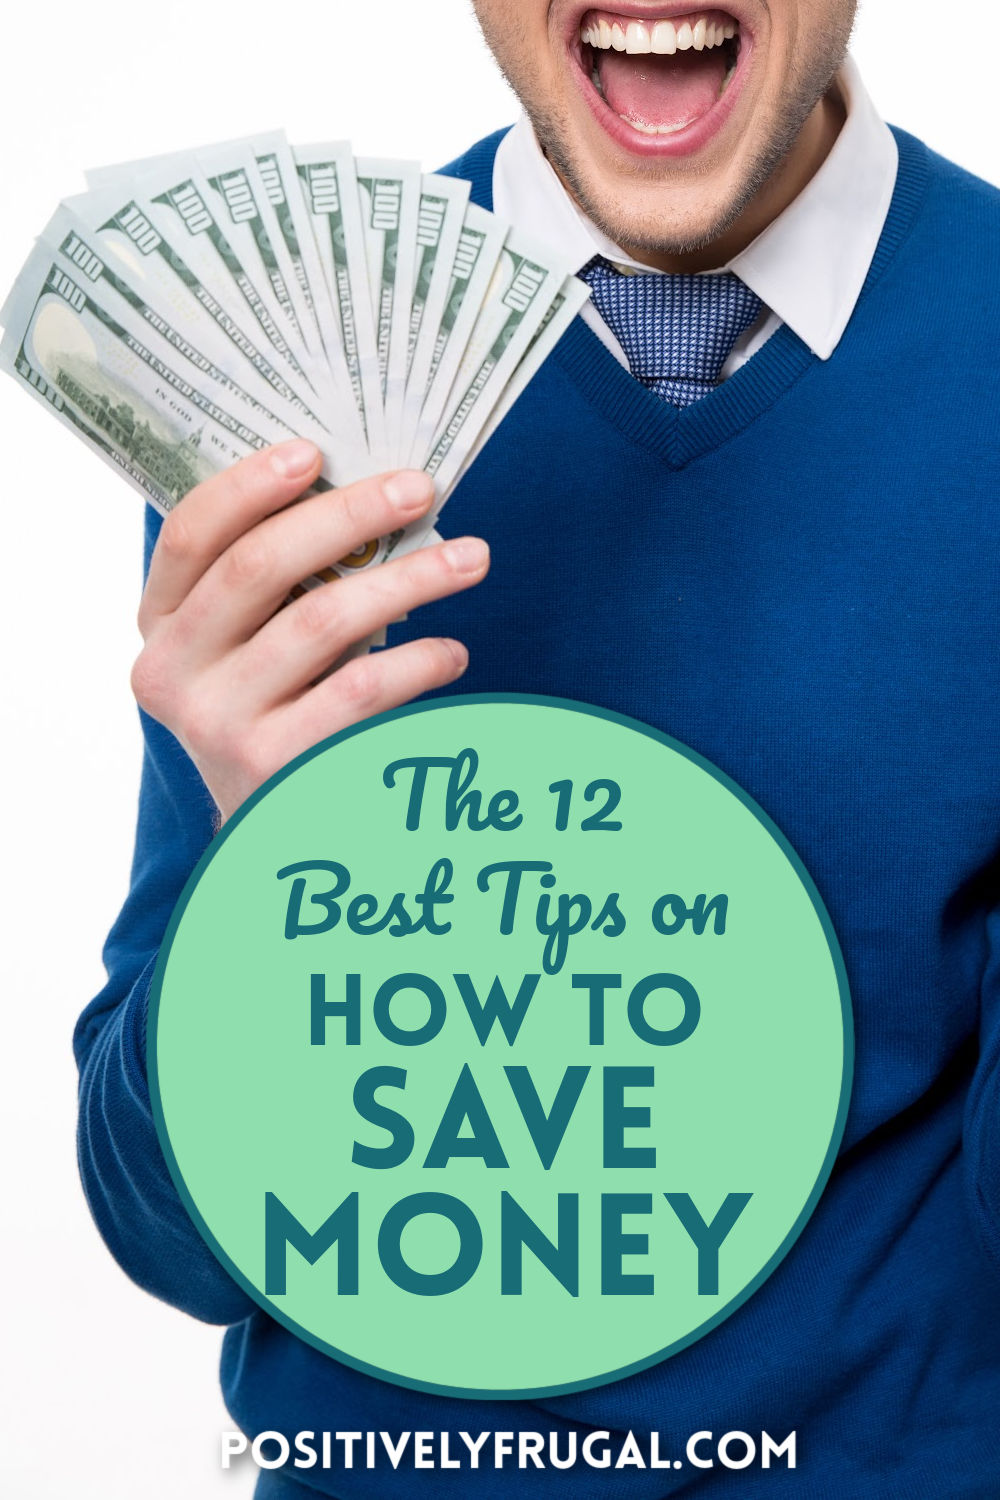 12 Best Tips on How To Save Money by PositivelyFrugal.com